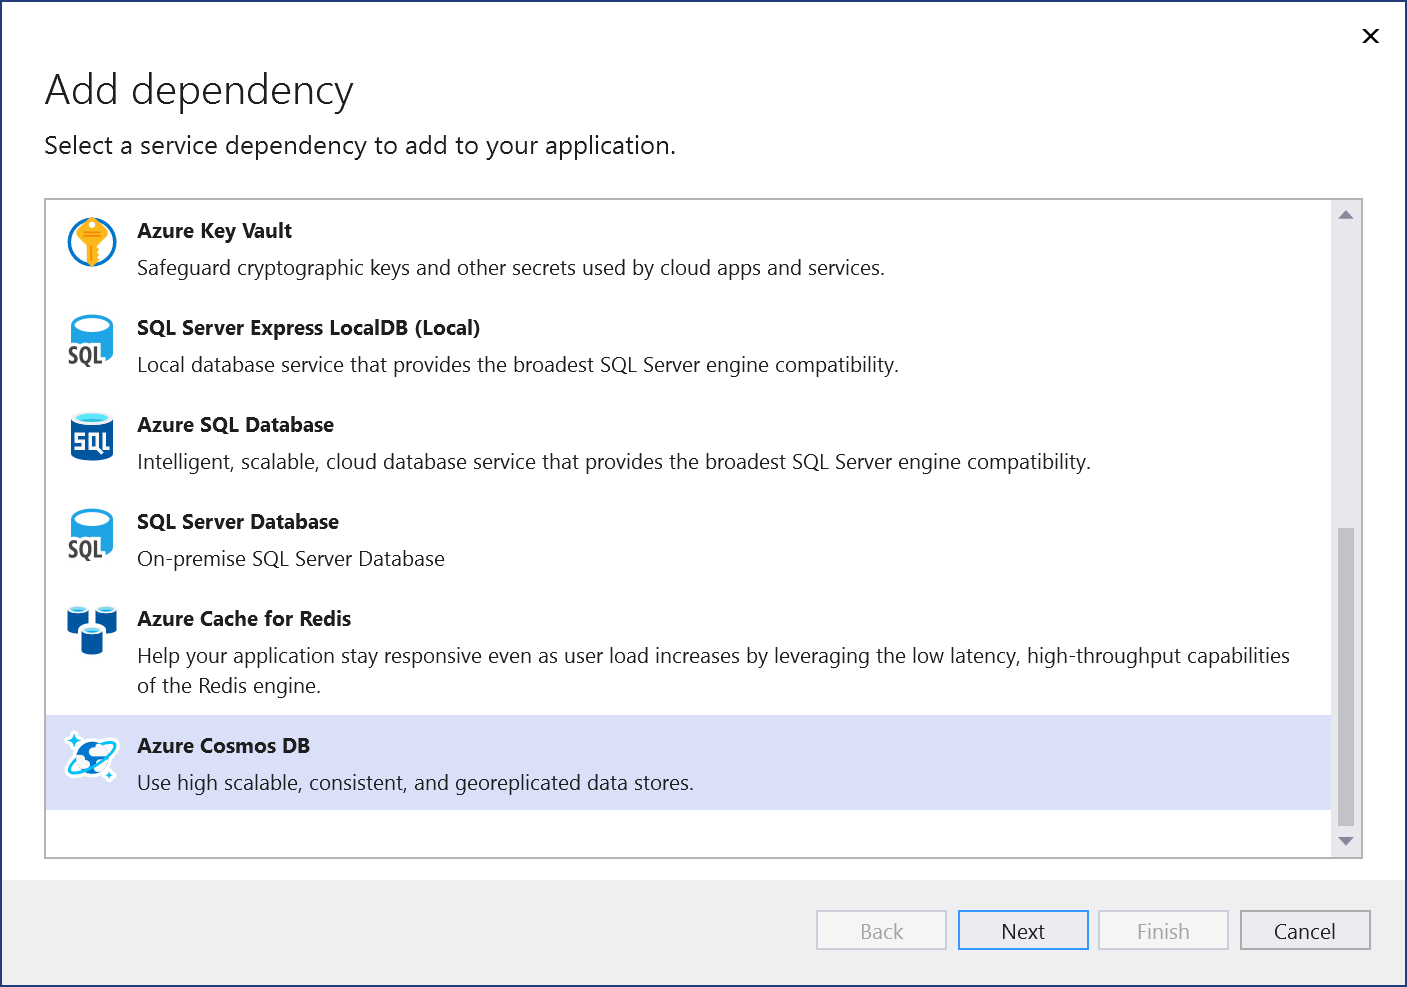 Screenshot showing "Add Dependency" screen, selecting the "Add Azure Cosmos DB" option.